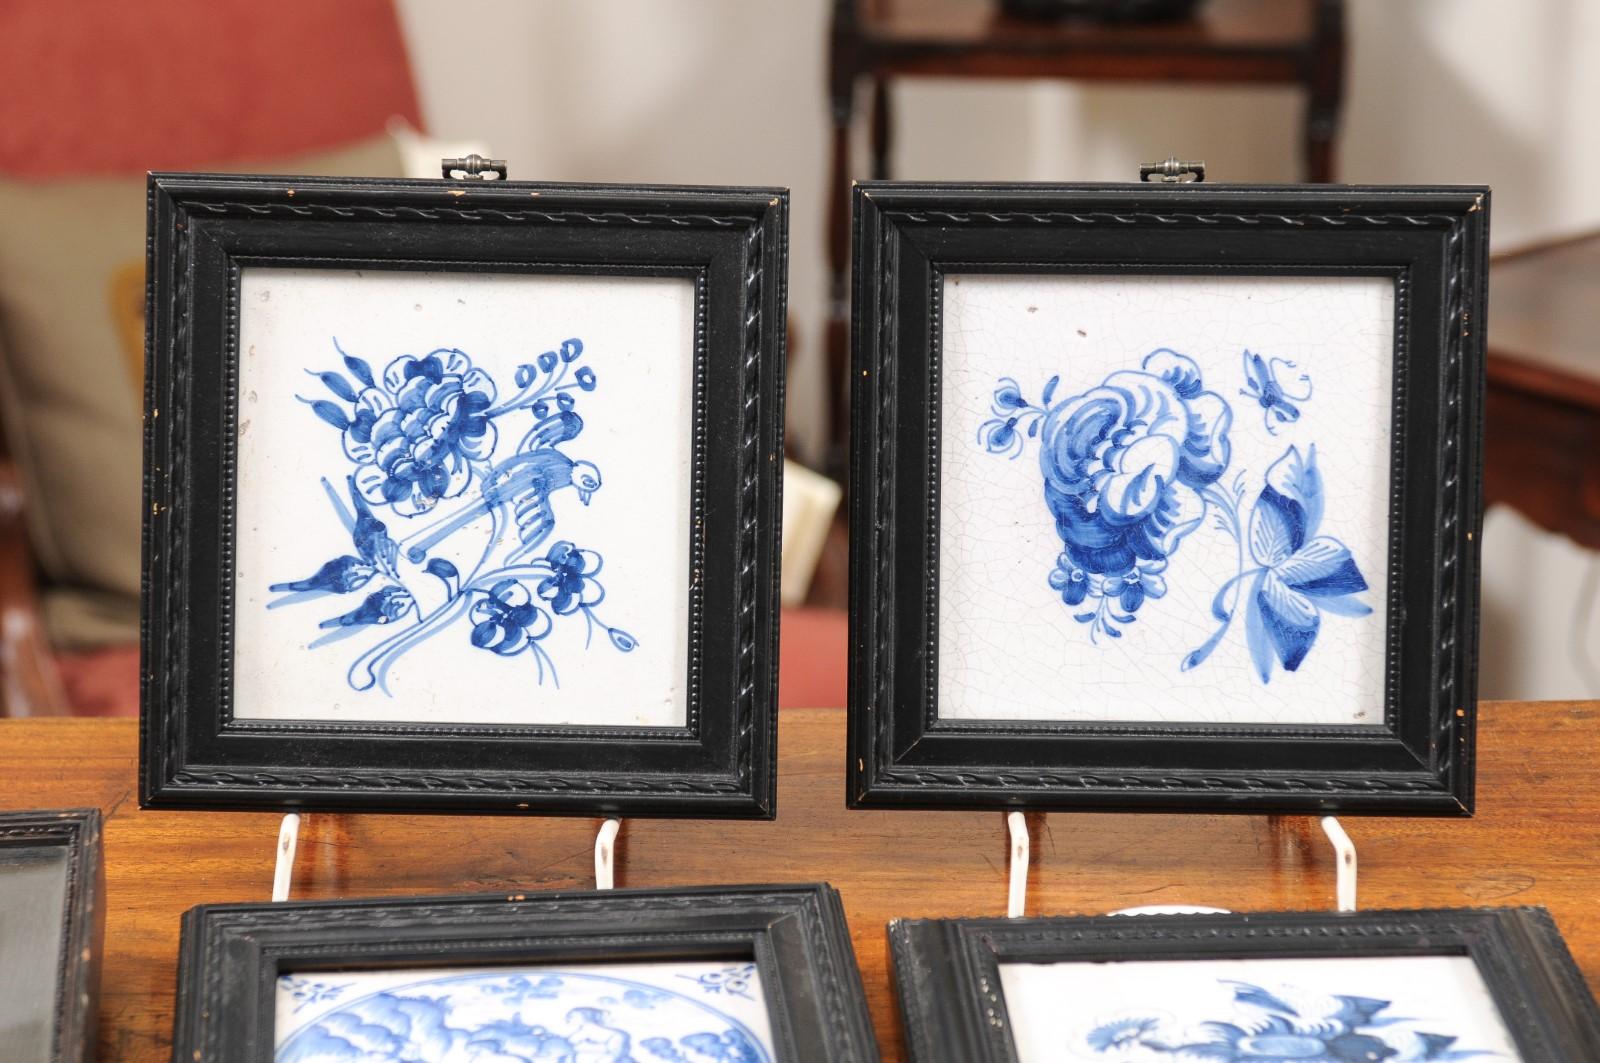  Set of 6 Assorted 18th Century Blue & White Delft Tiles in Black Frames For Sale 2